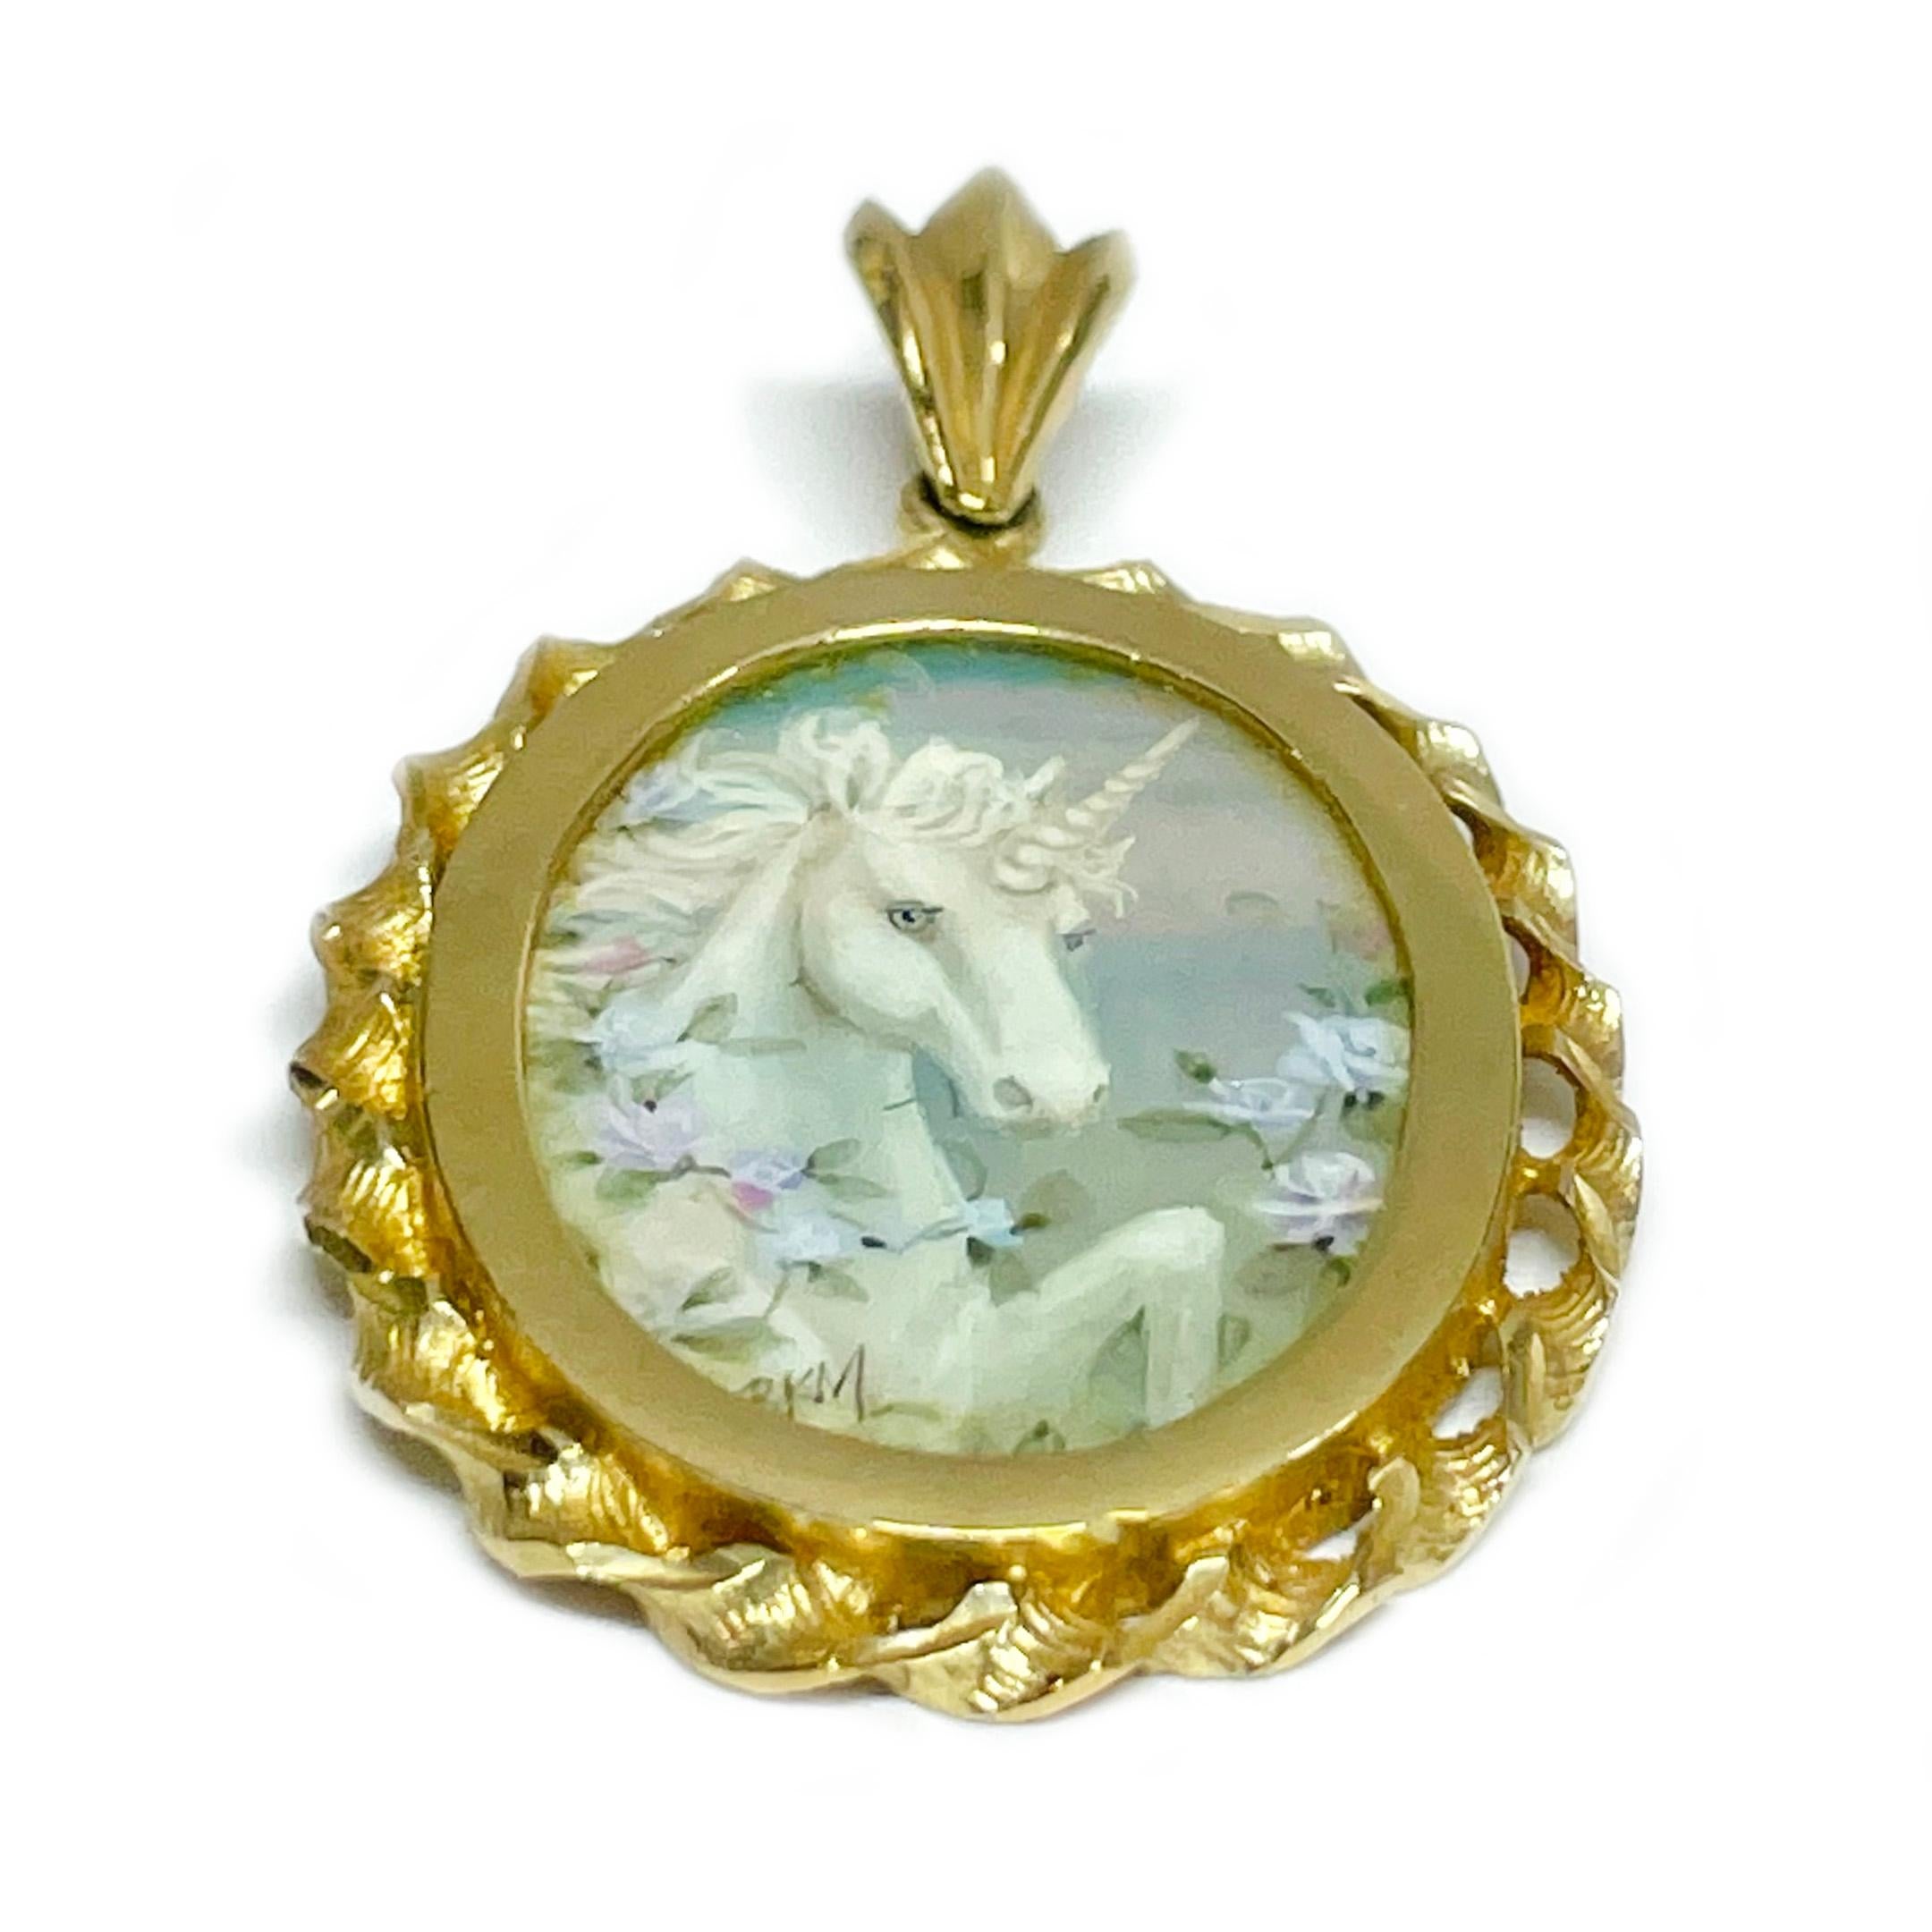 14 Karat Yellow Gold Unicorn Hand Painted on a Mother of Pearl Pendant. The miniature painting is set in a 14 karat gold twisted rope oval frame with diamond-cut details. The painting is signed by the master artist, BKM Brian M. and includes a